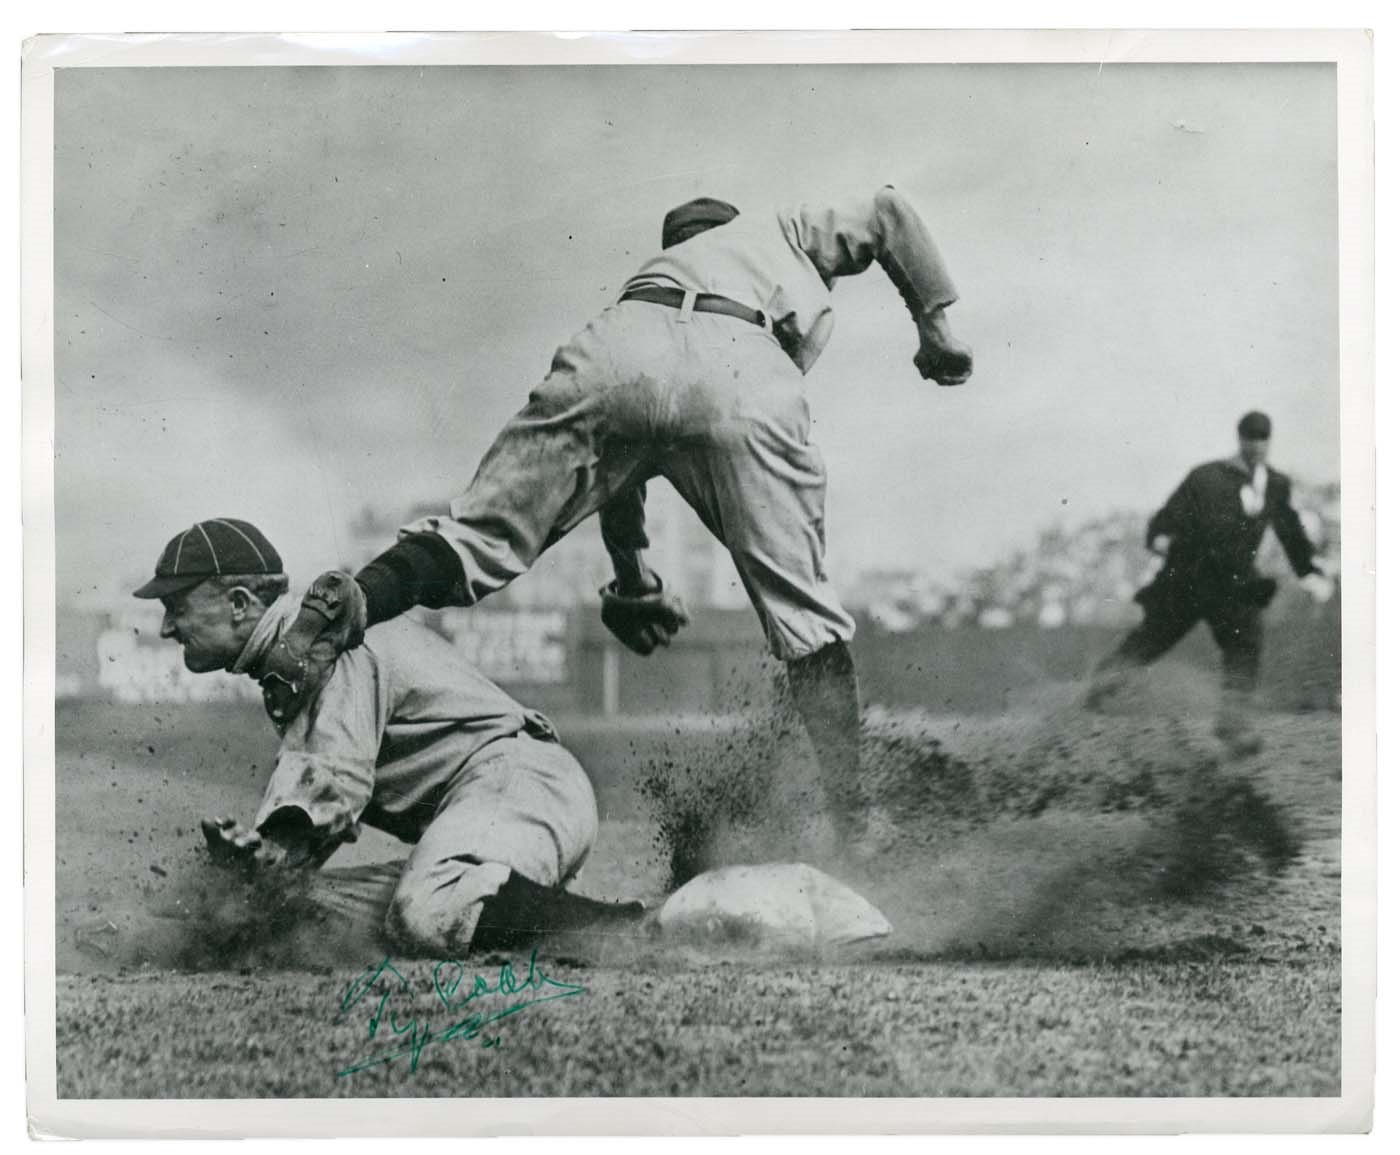 Ty Cobb and Detroit Tigers - The Holy Grail of Signed Photographs - Ty Cobb "Sliding Into Third" by Charles Conlon (PSA & JSA)